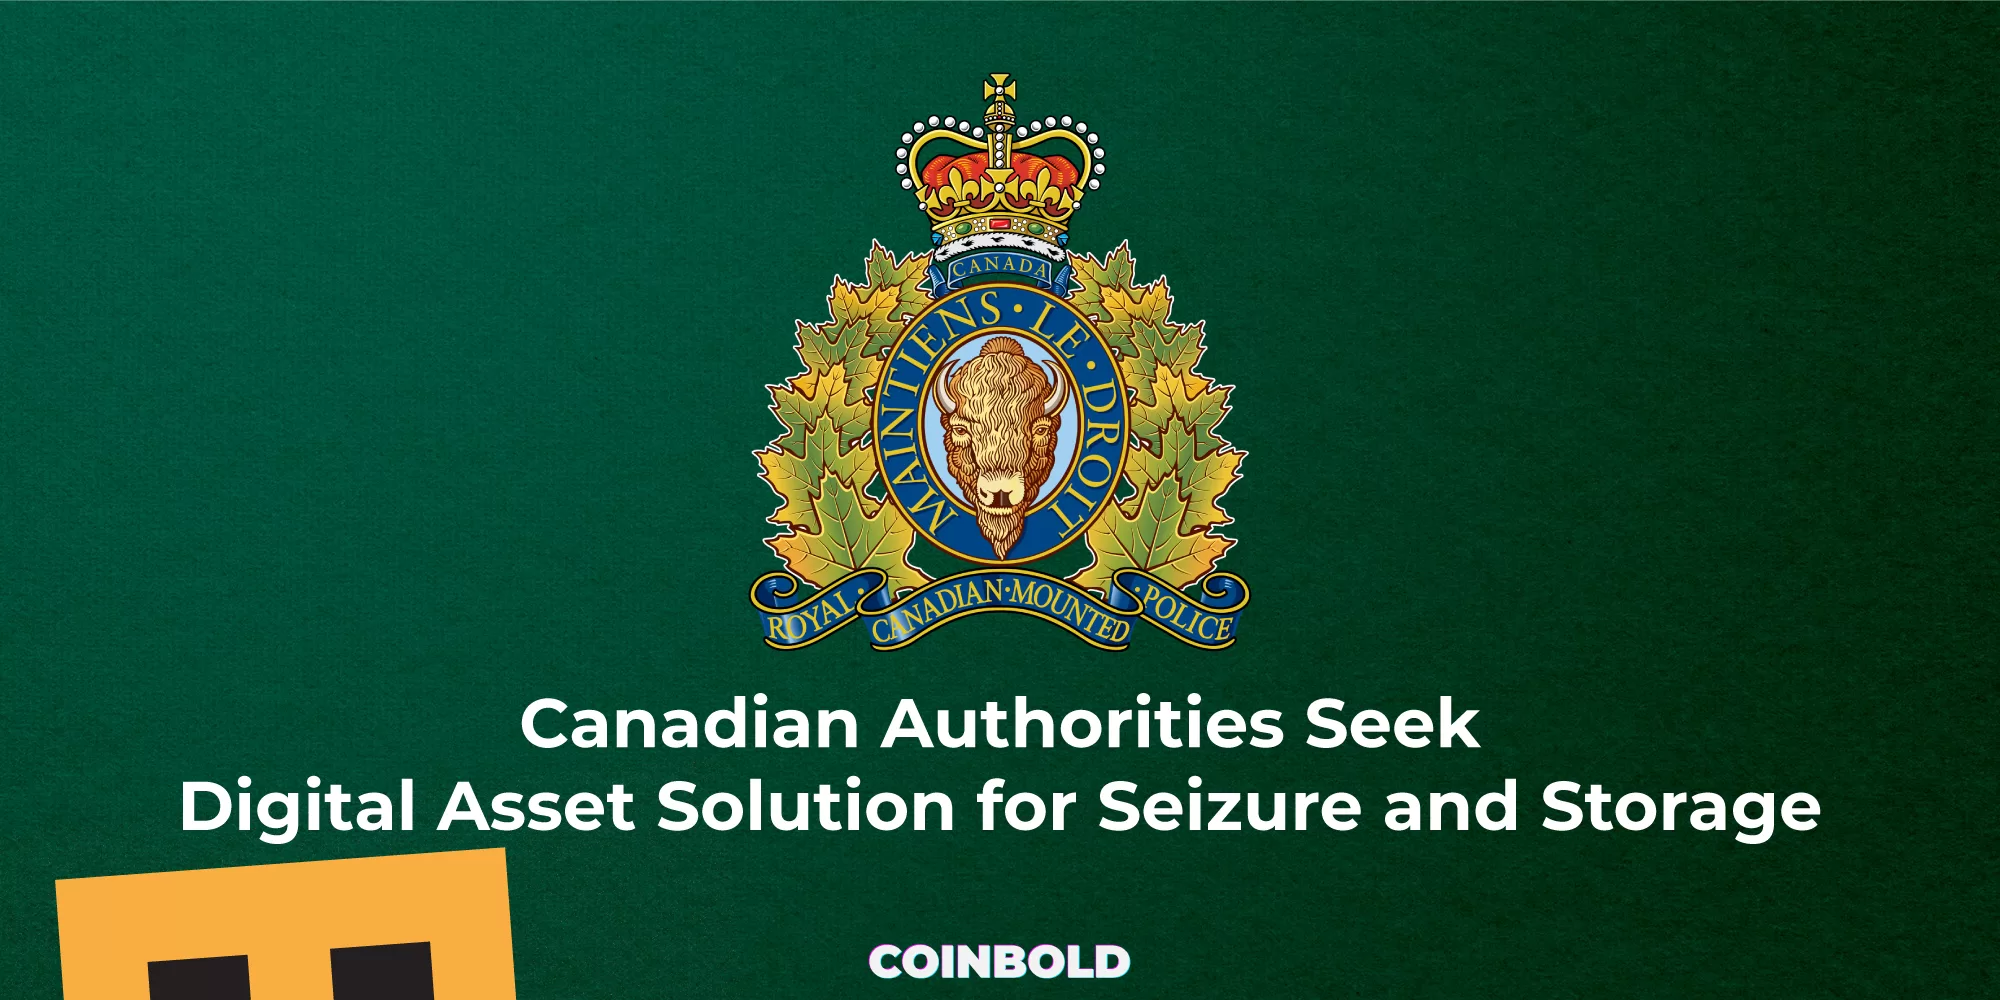 Canadian Authorities Seek Digital Asset Solution for Seizure and Storage